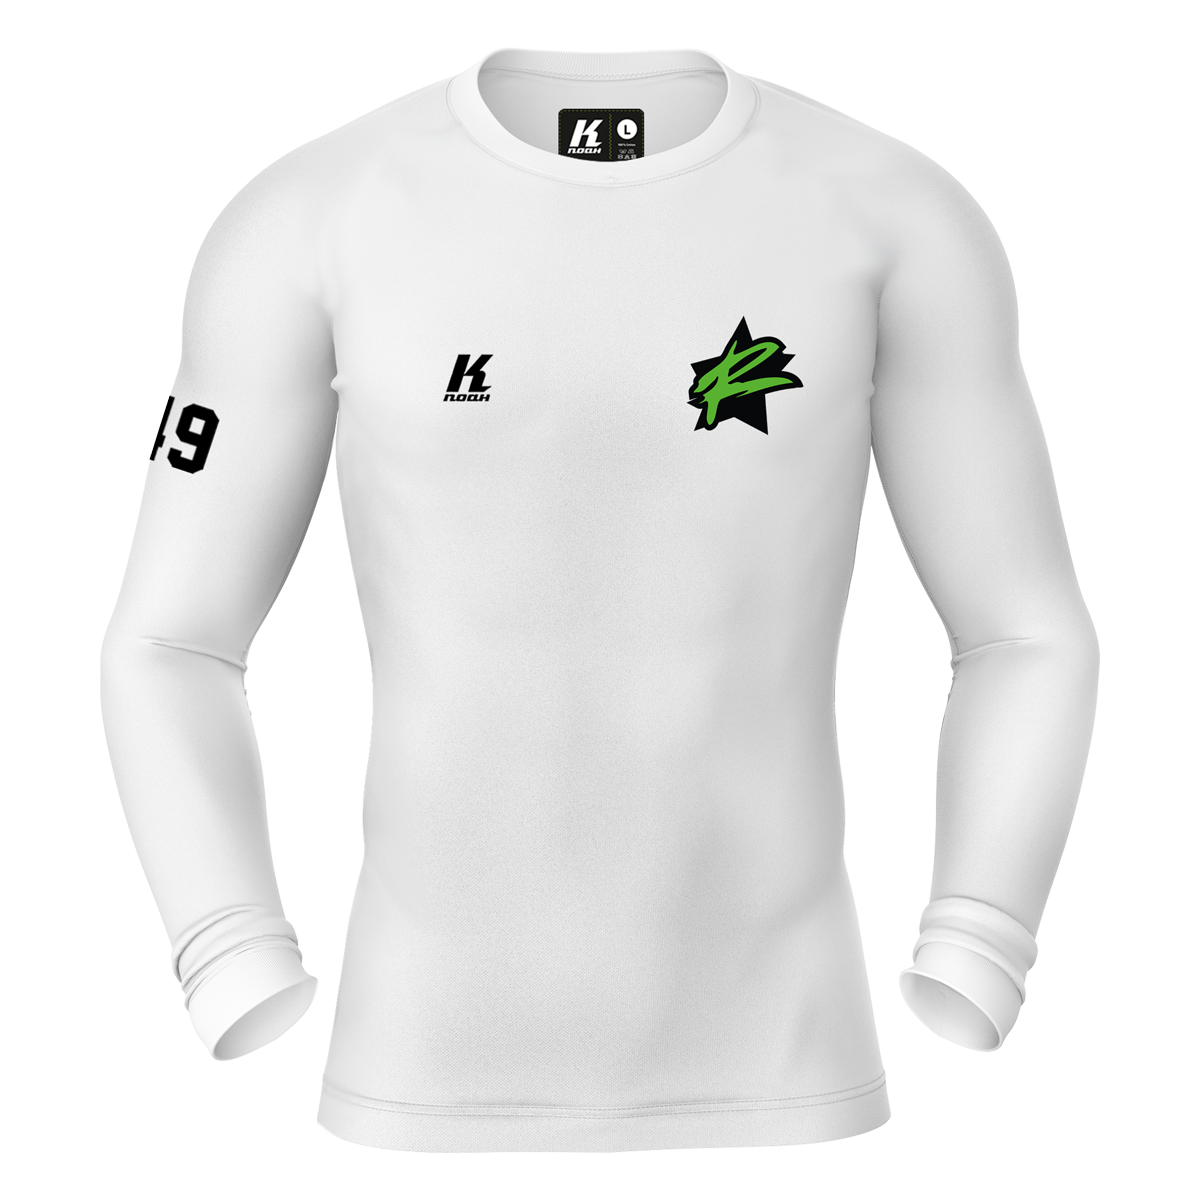 Rebels K.Tech Compression Longsleeve Shirt white with Playernumber/Initials